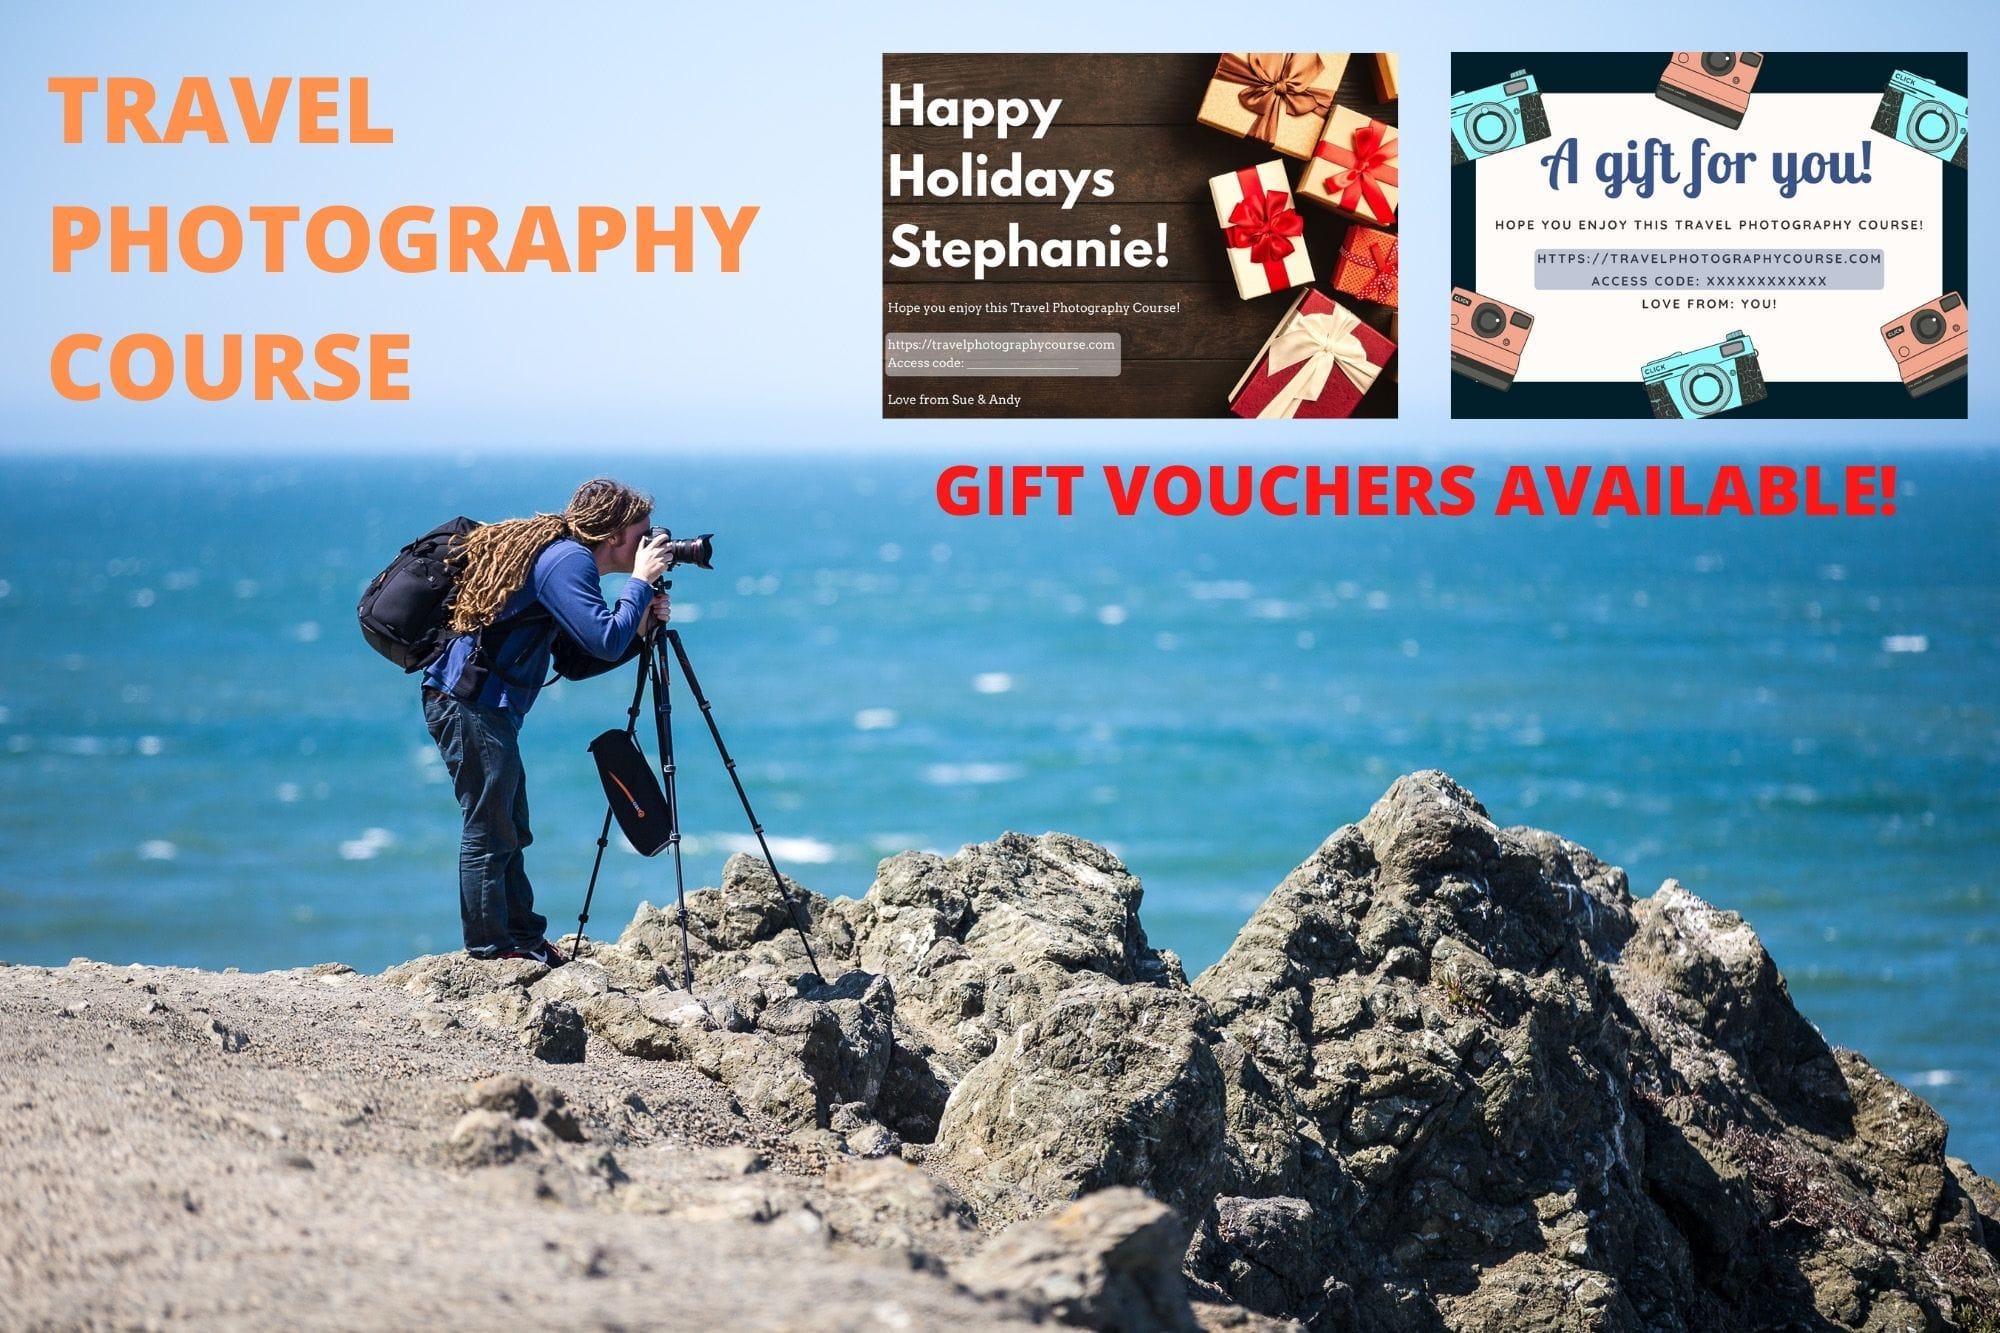 GIFT VOUCHERS AVAILABLE!